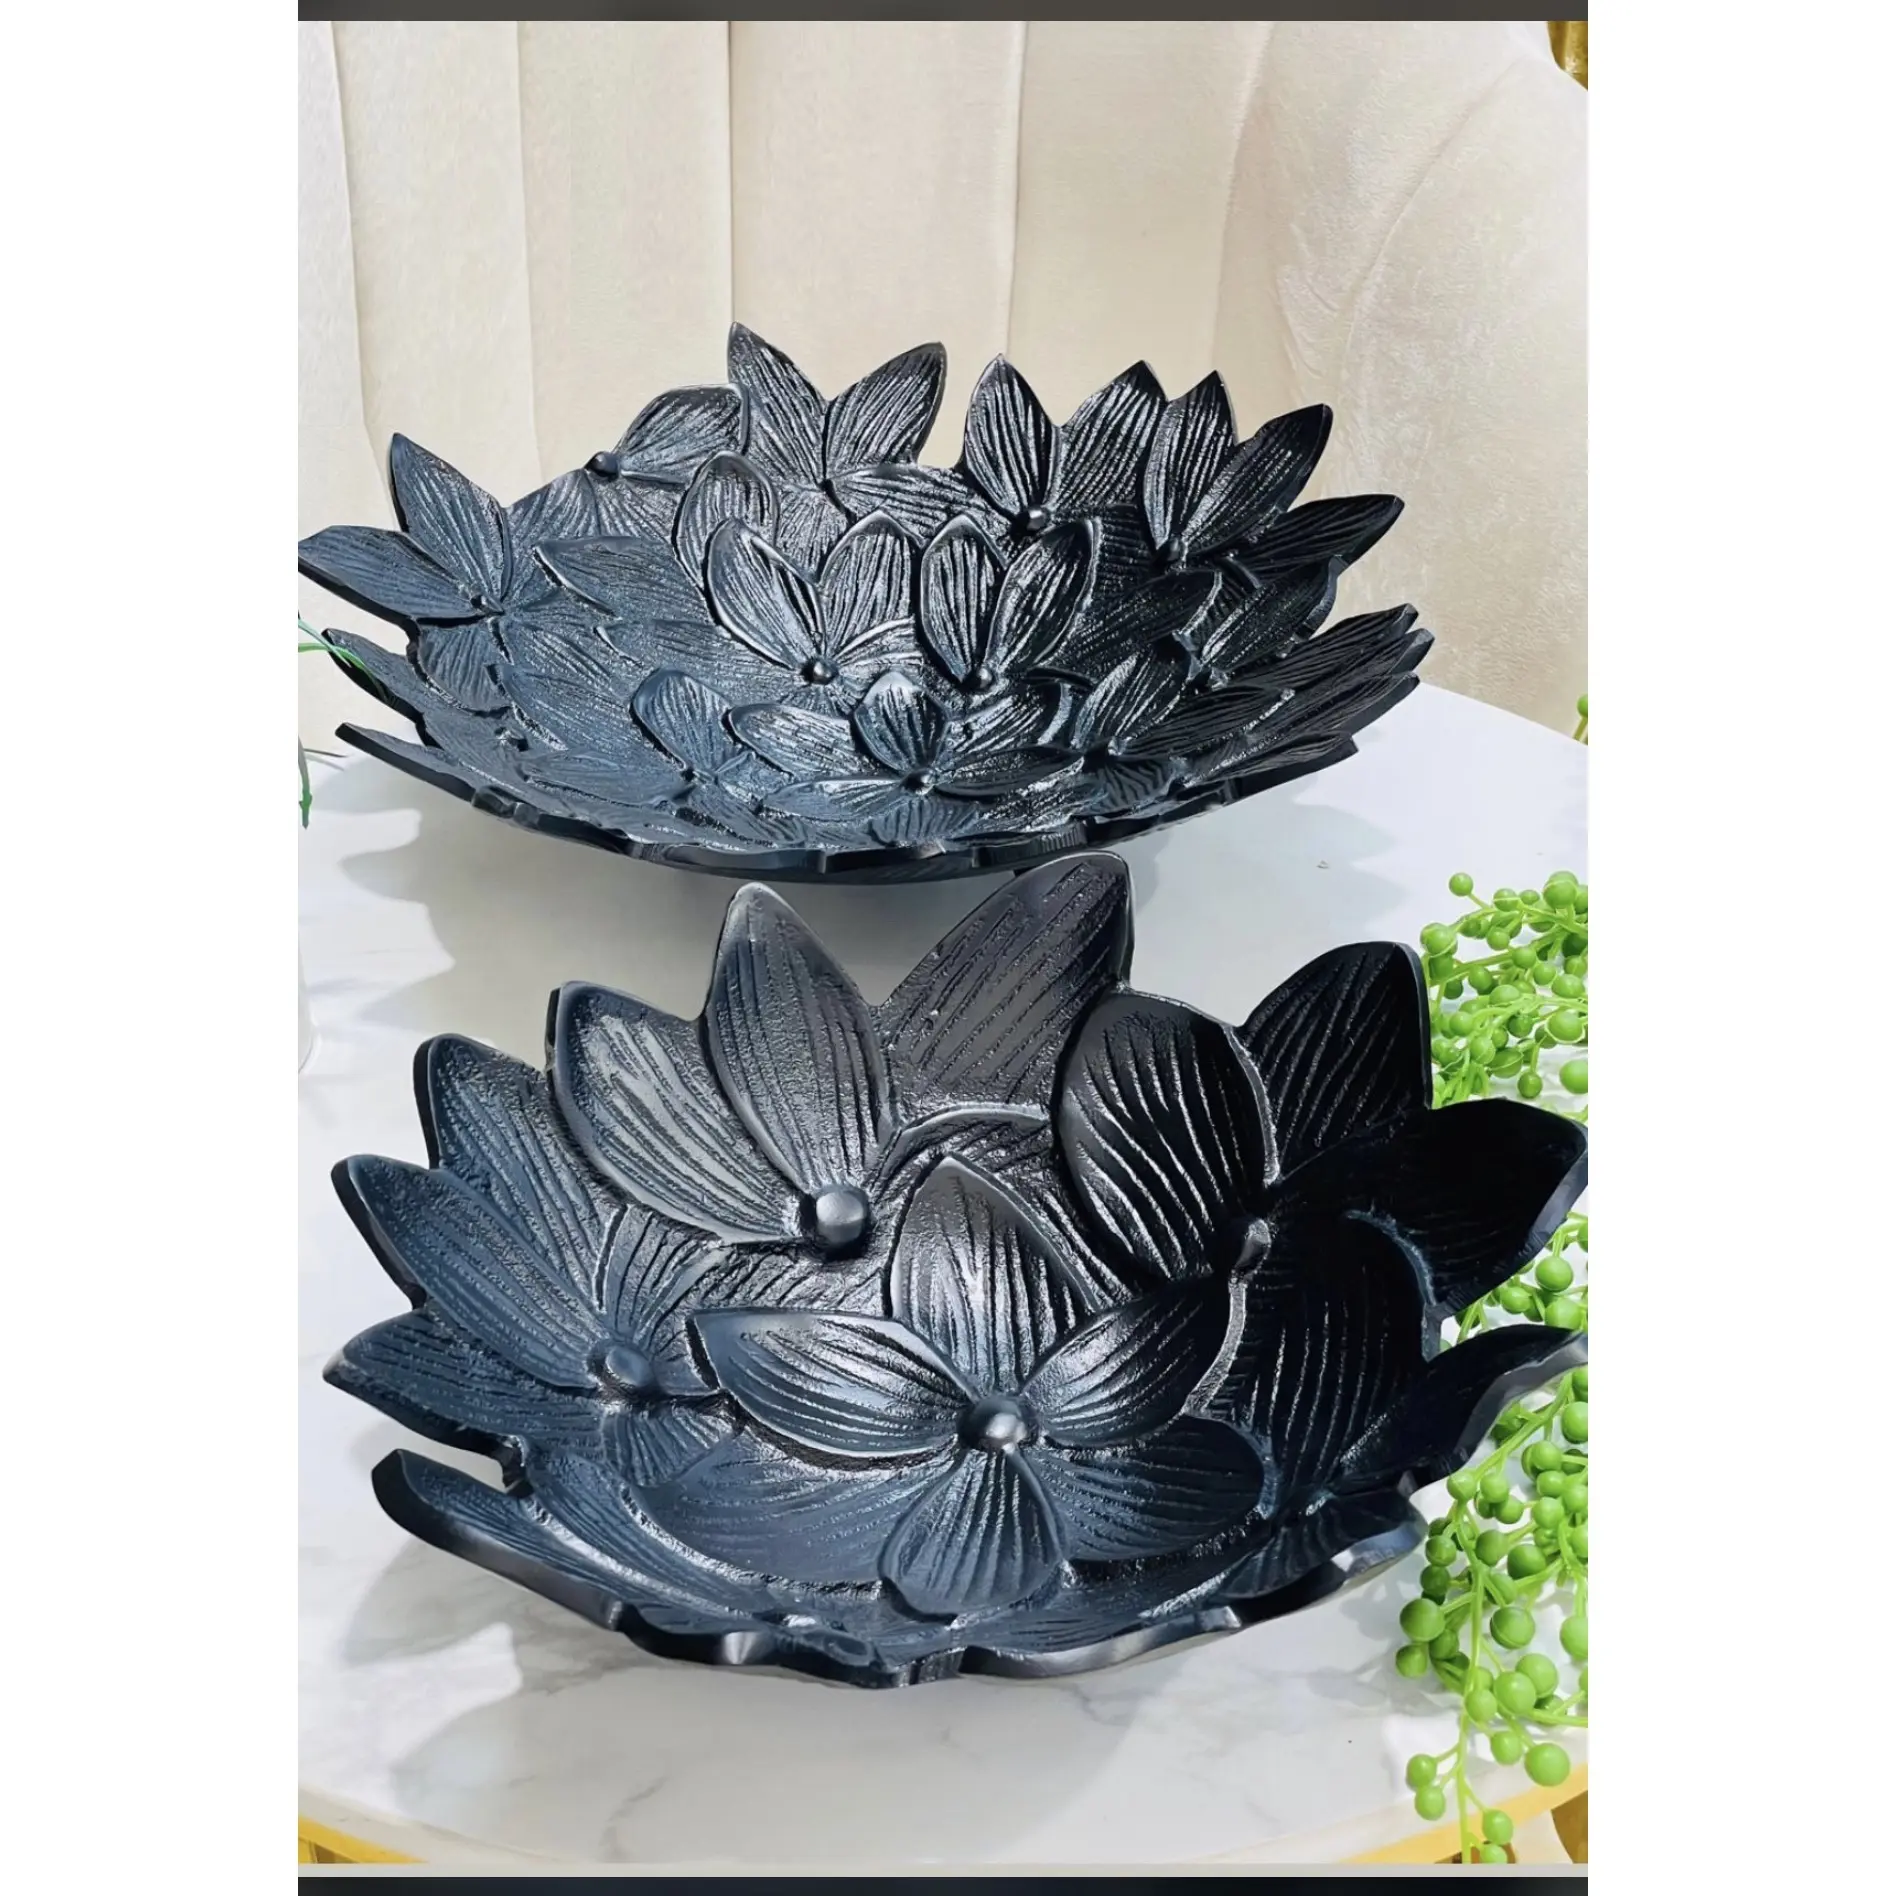 Leaf Design New Style Decorative Dry Fruit Bowl Gift & Craft Handmade Metal Table Top Dry Fruit Display Bowl Plate and Dishes